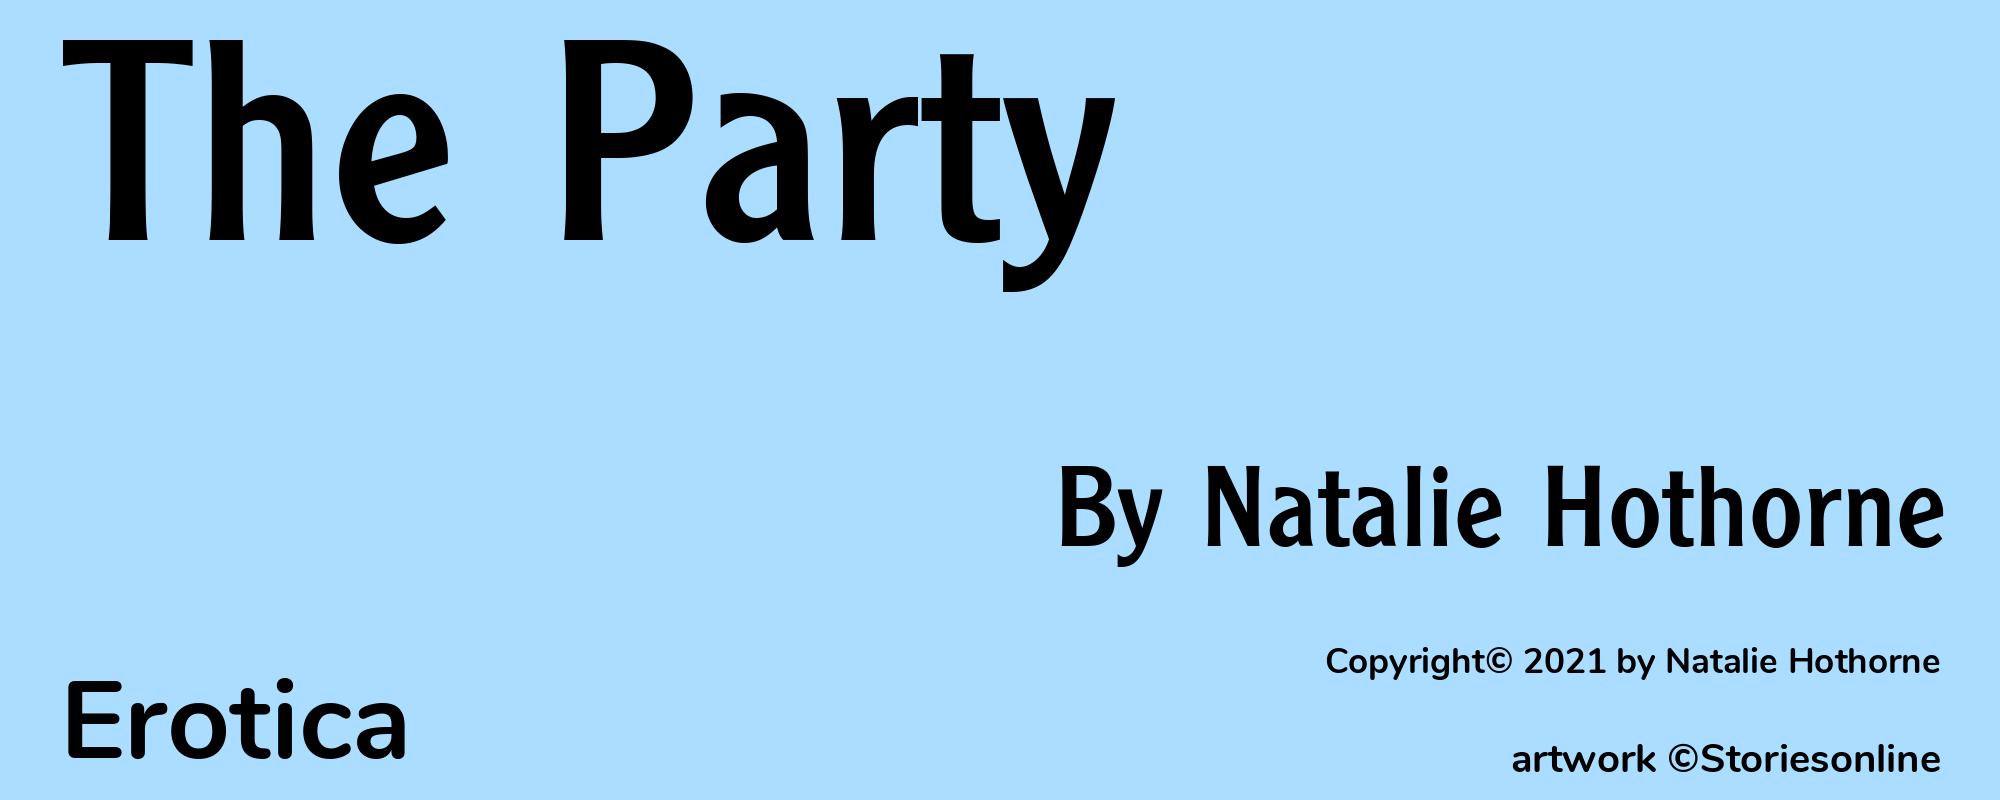 The Party - Cover